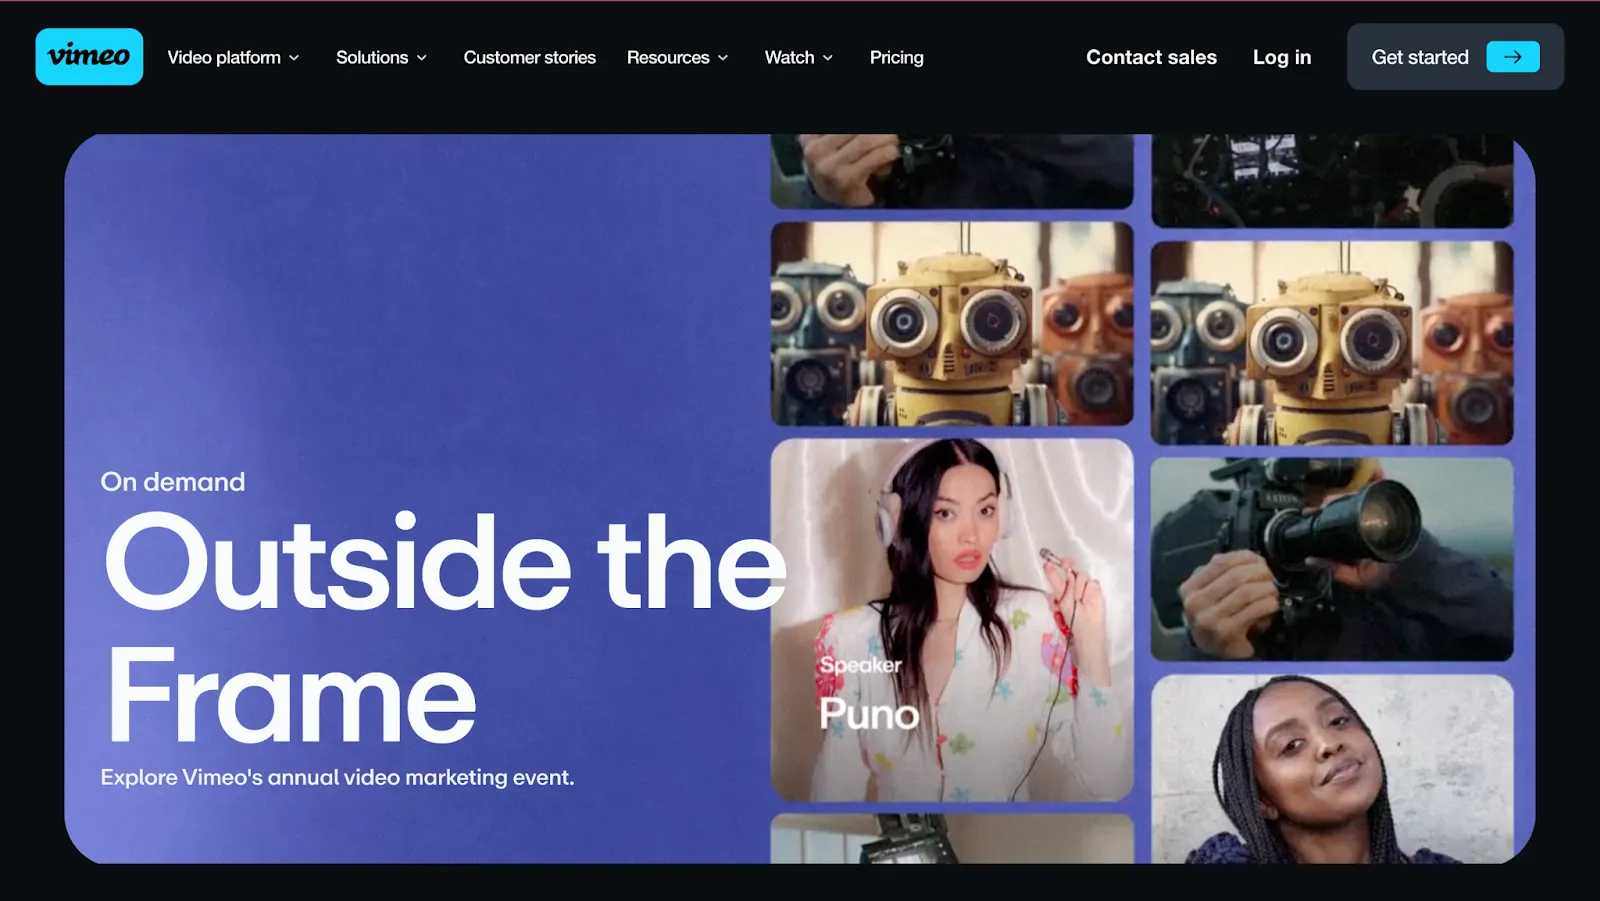 vimeo home page for collaboration software